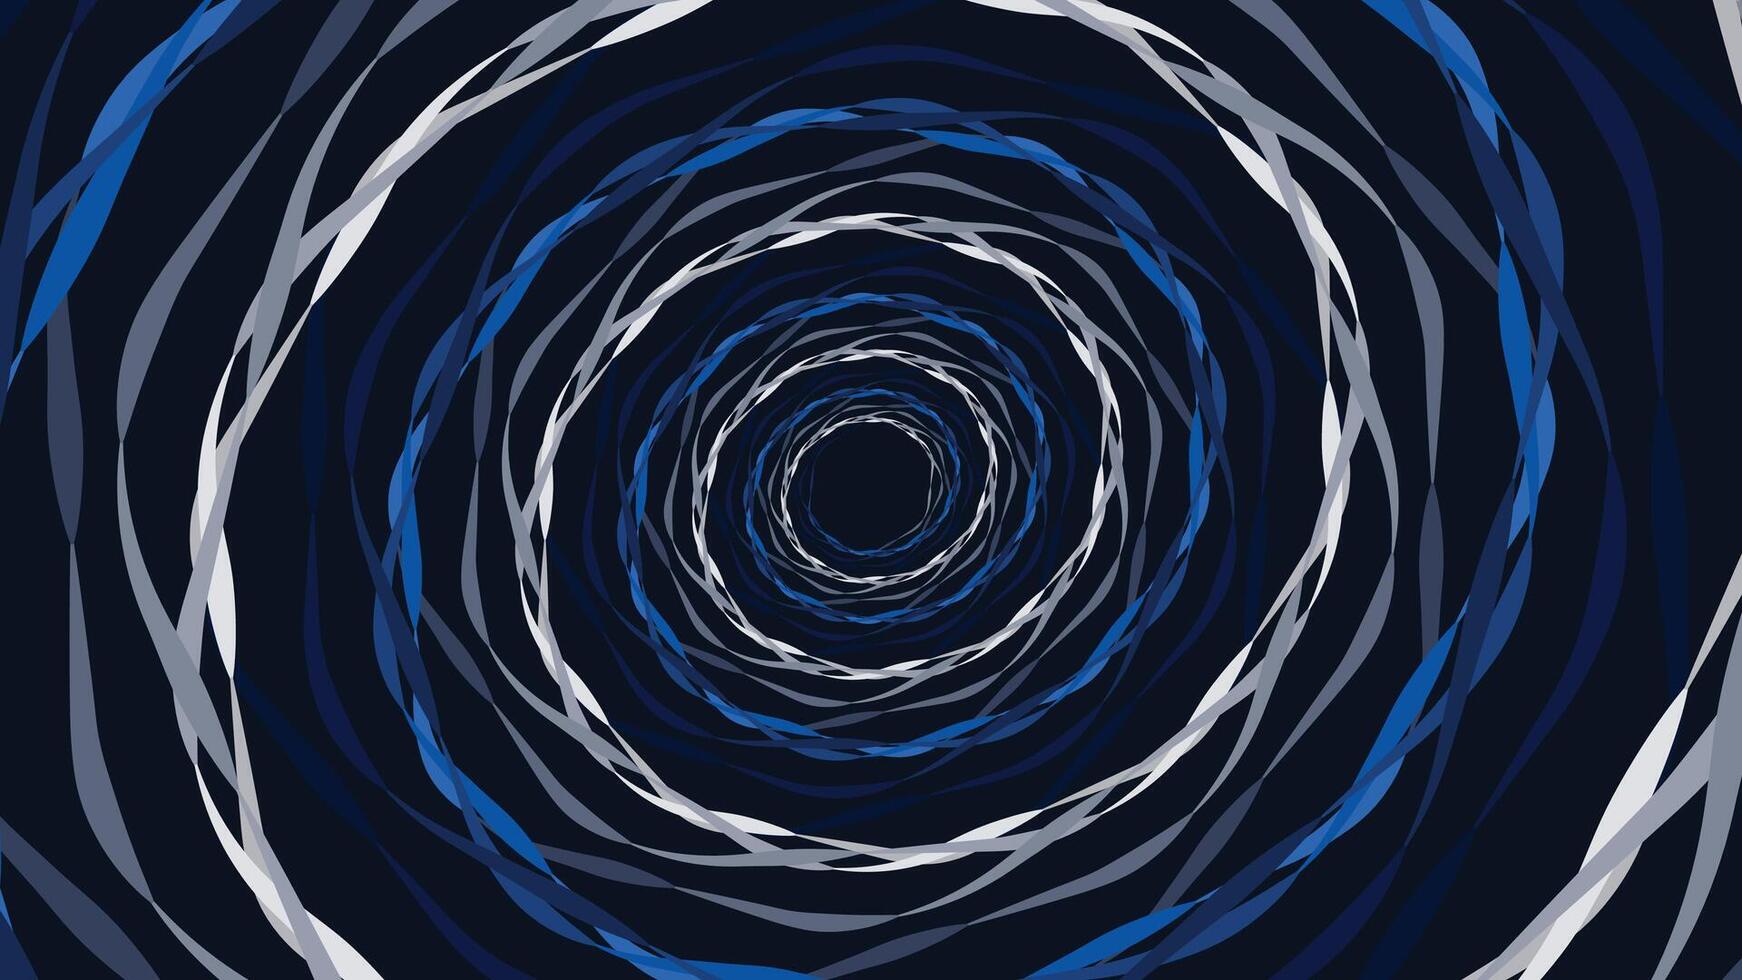 Abstarct spiral round vortex style creative data center background in dark blue color. This minimalist background can be used as a banner or wallpaper.It also can be presented as urgency. vector